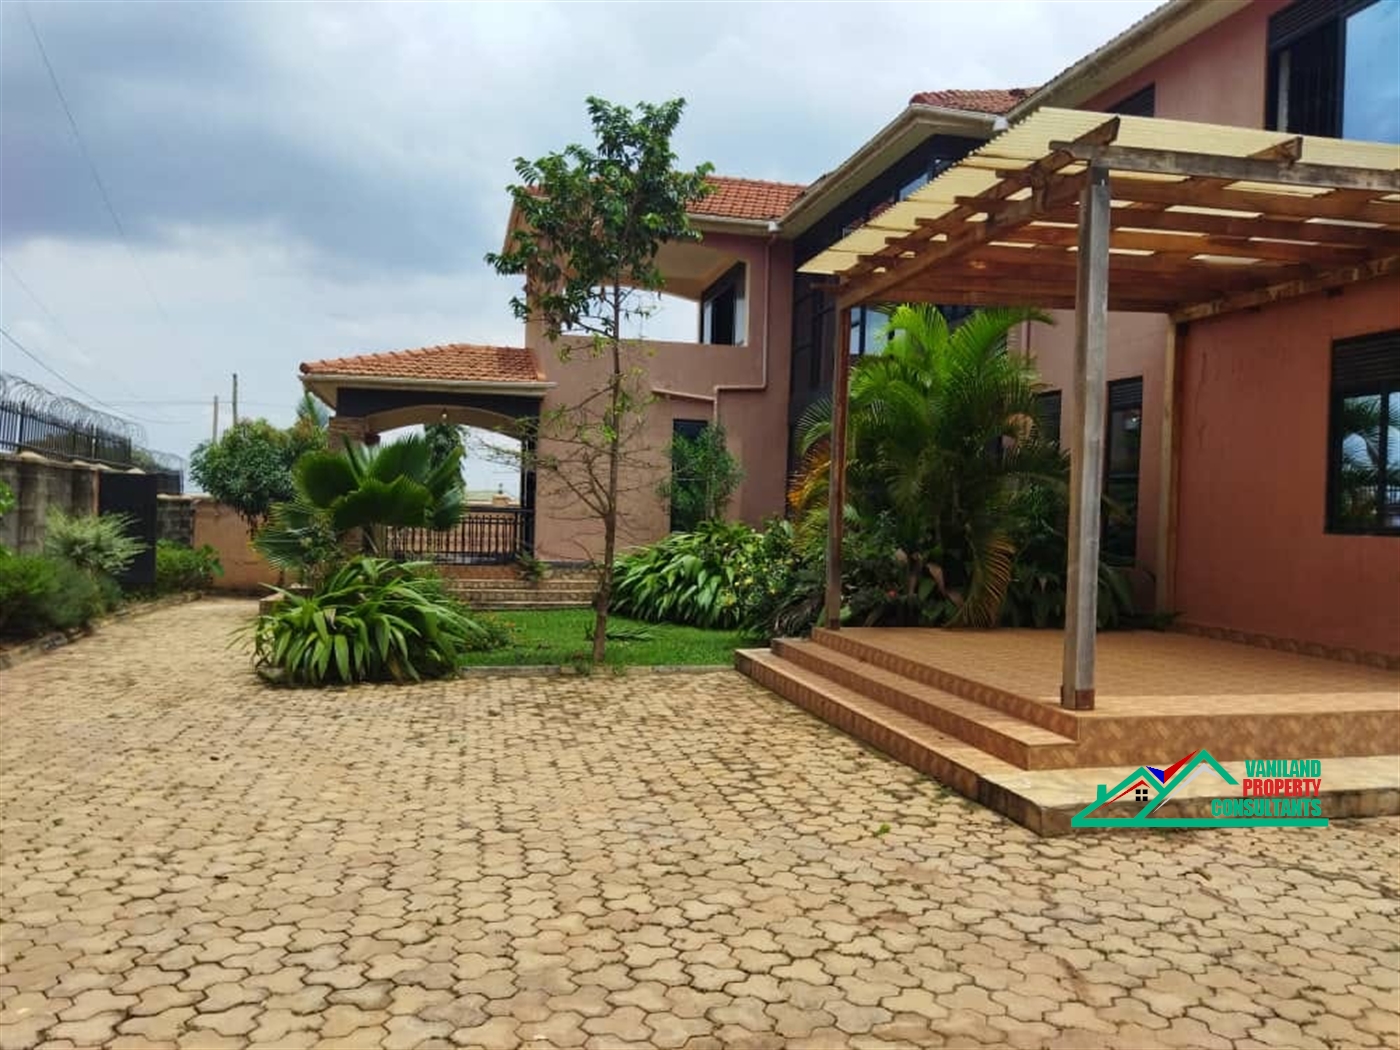 Bungalow for rent in Mutungo Wakiso